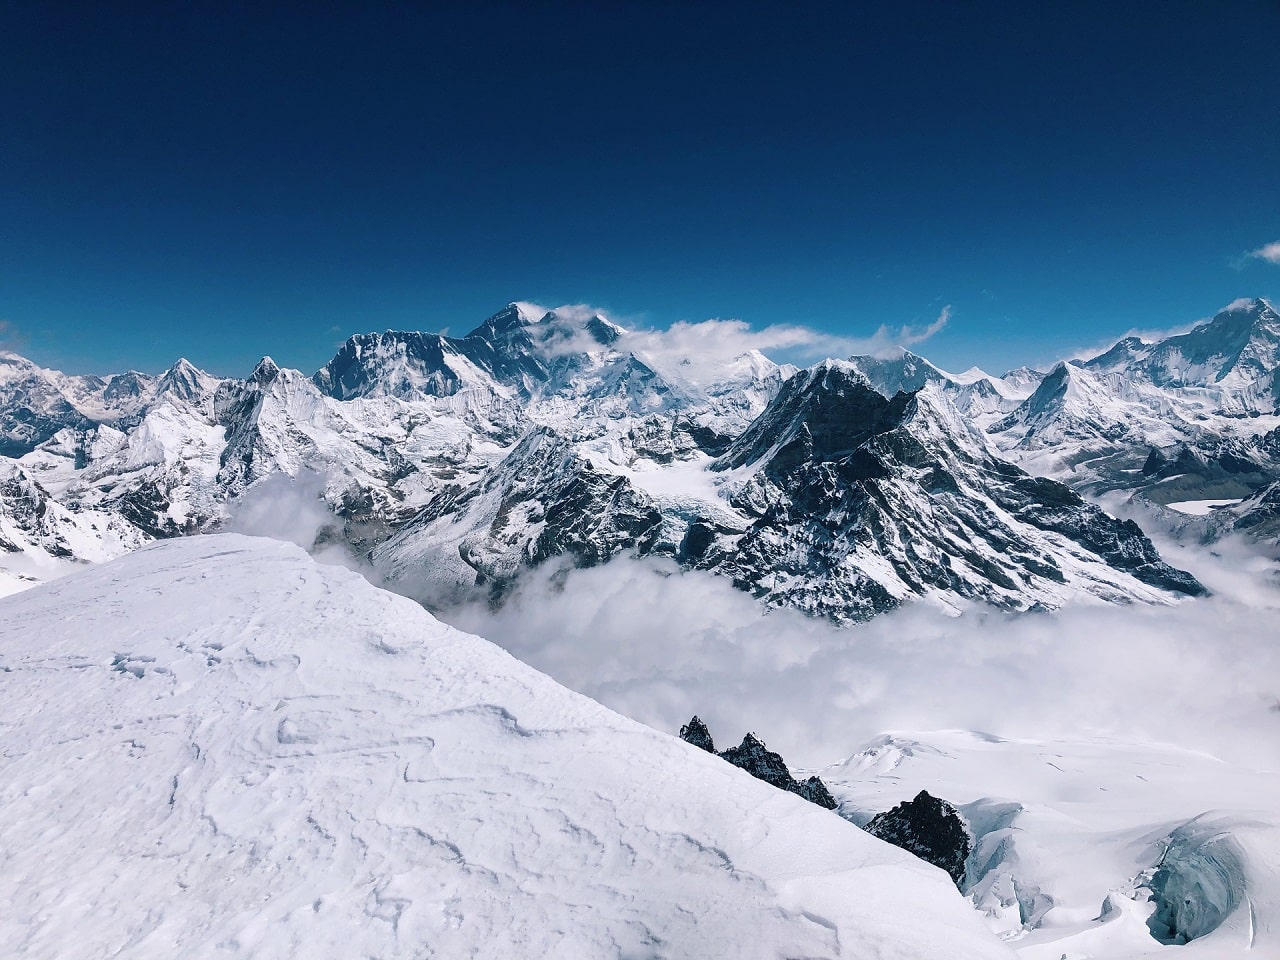 Panoramic landscape views including of Mt Everest and Lhotse from the summit of Mera Peak